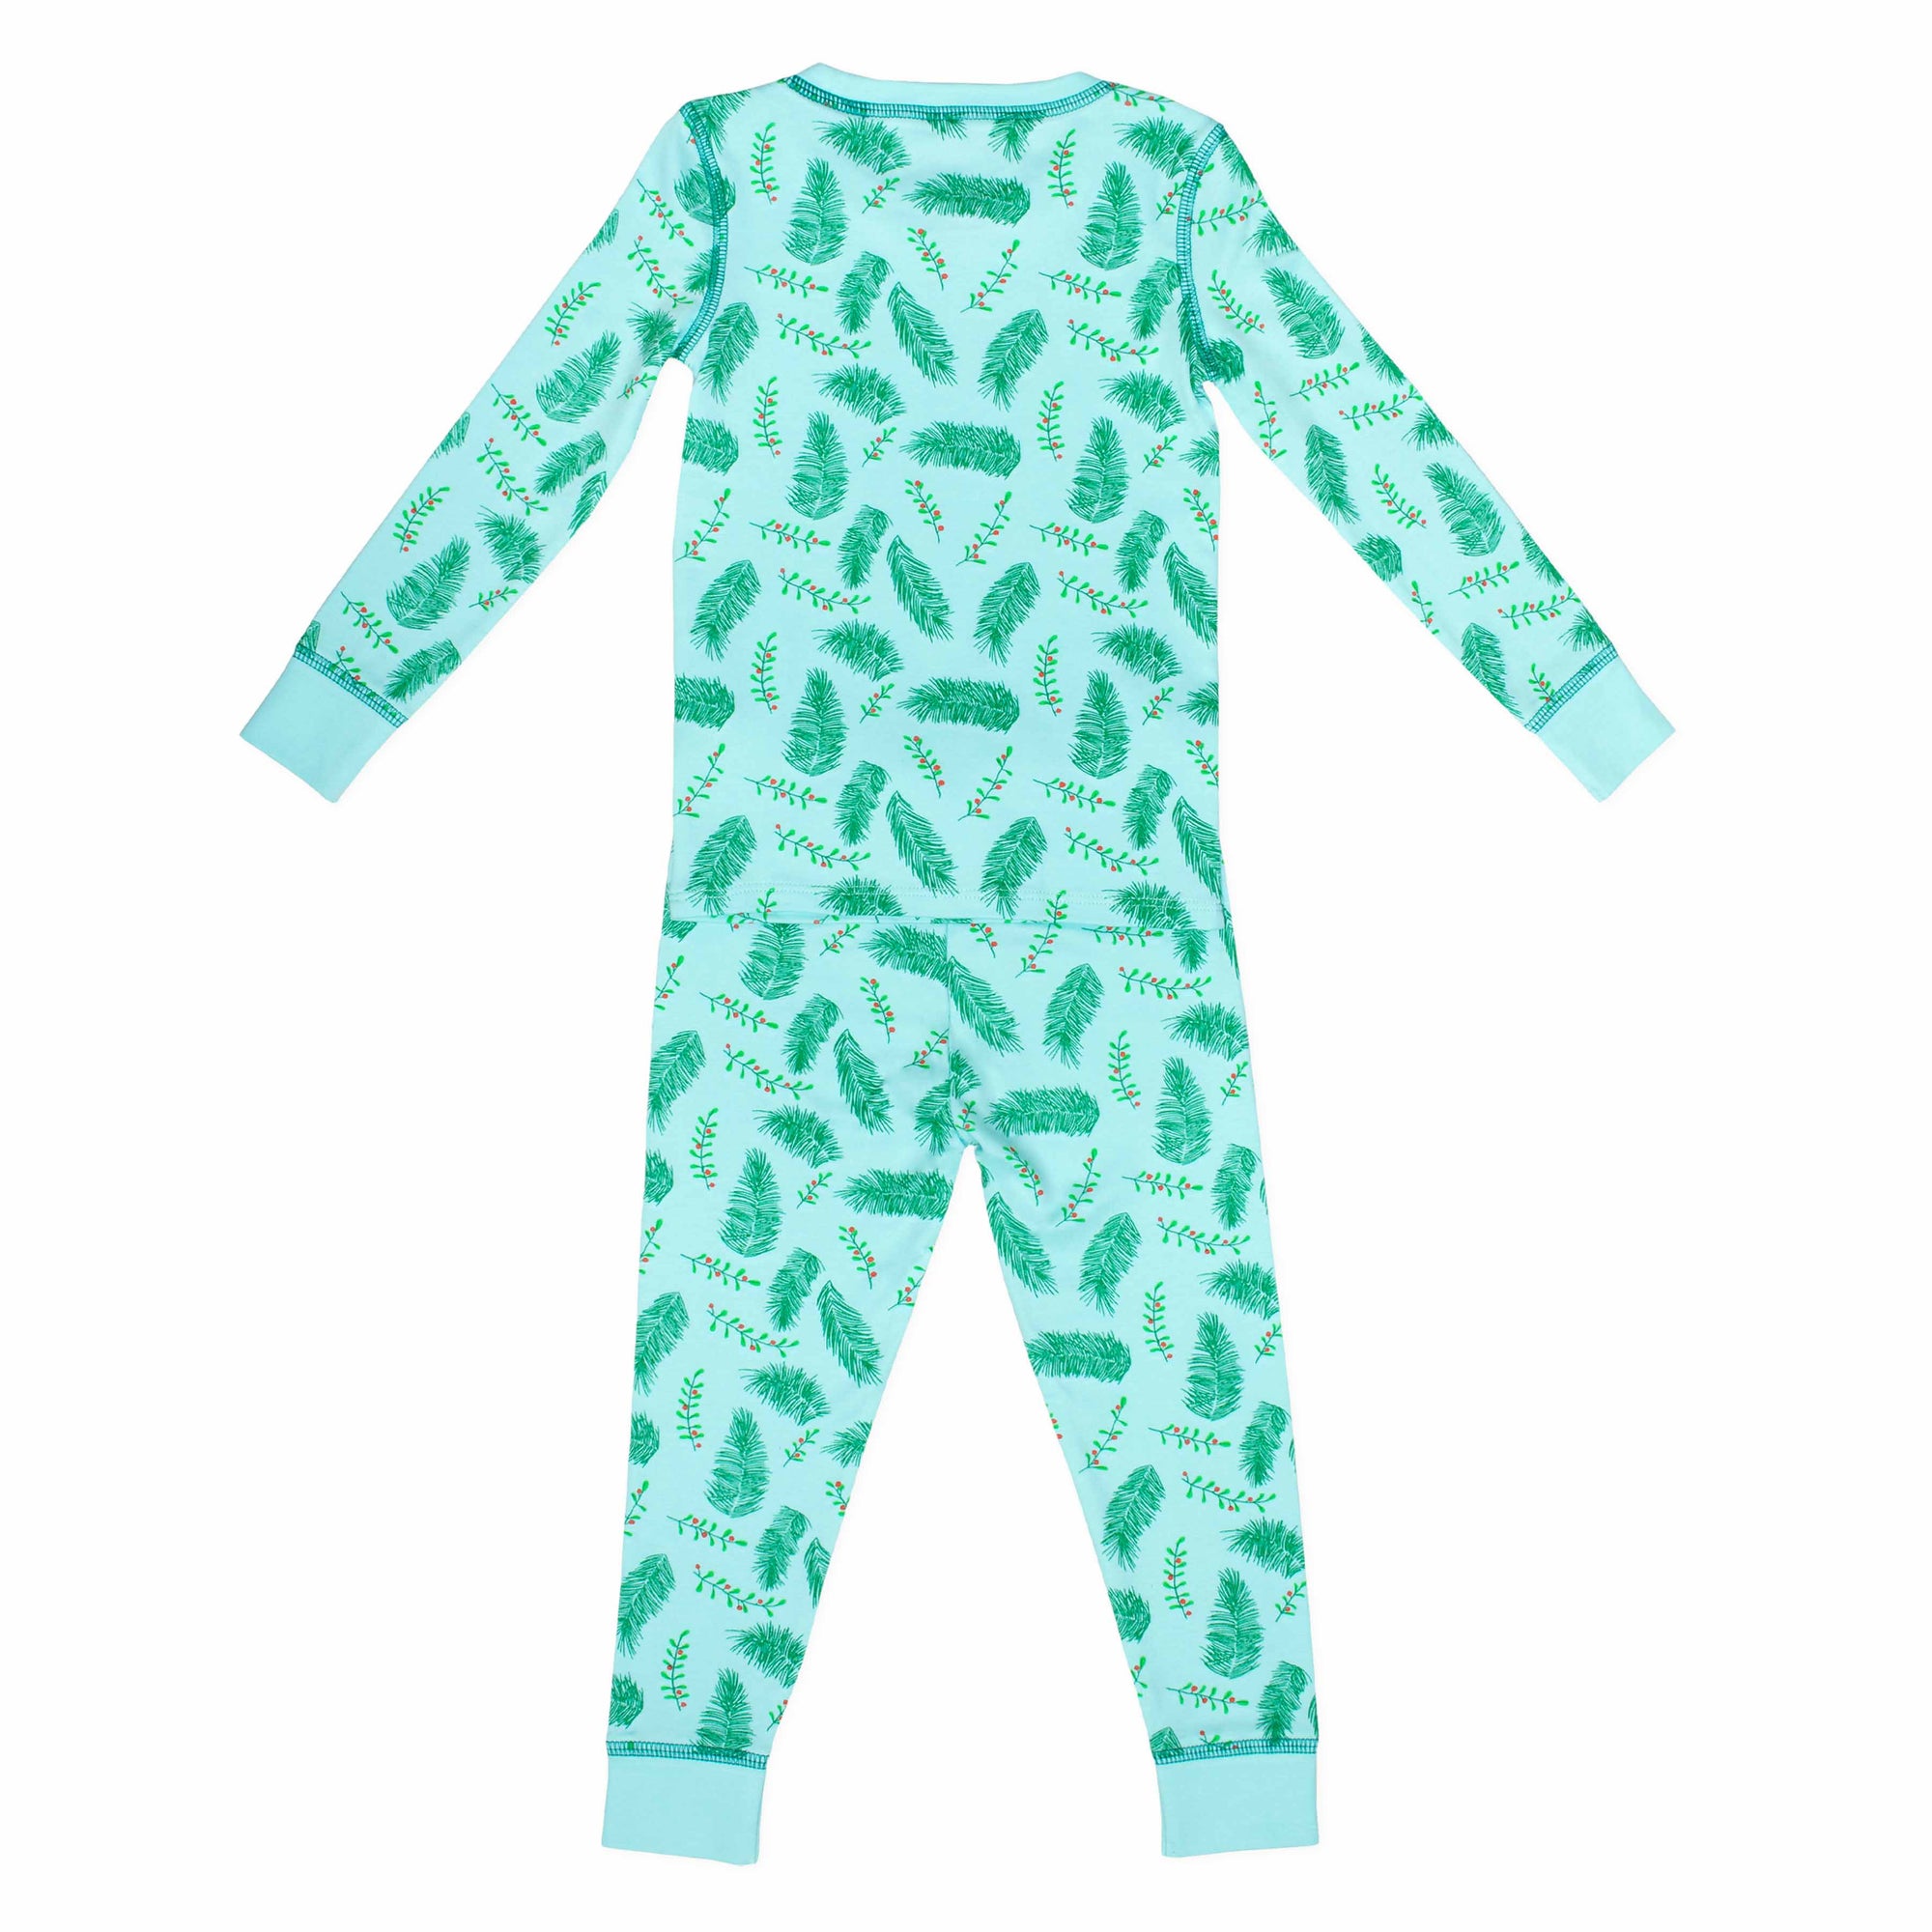 Blue two-piece pajama set with vintage Christmas holly pattern made with pima cotton - back view